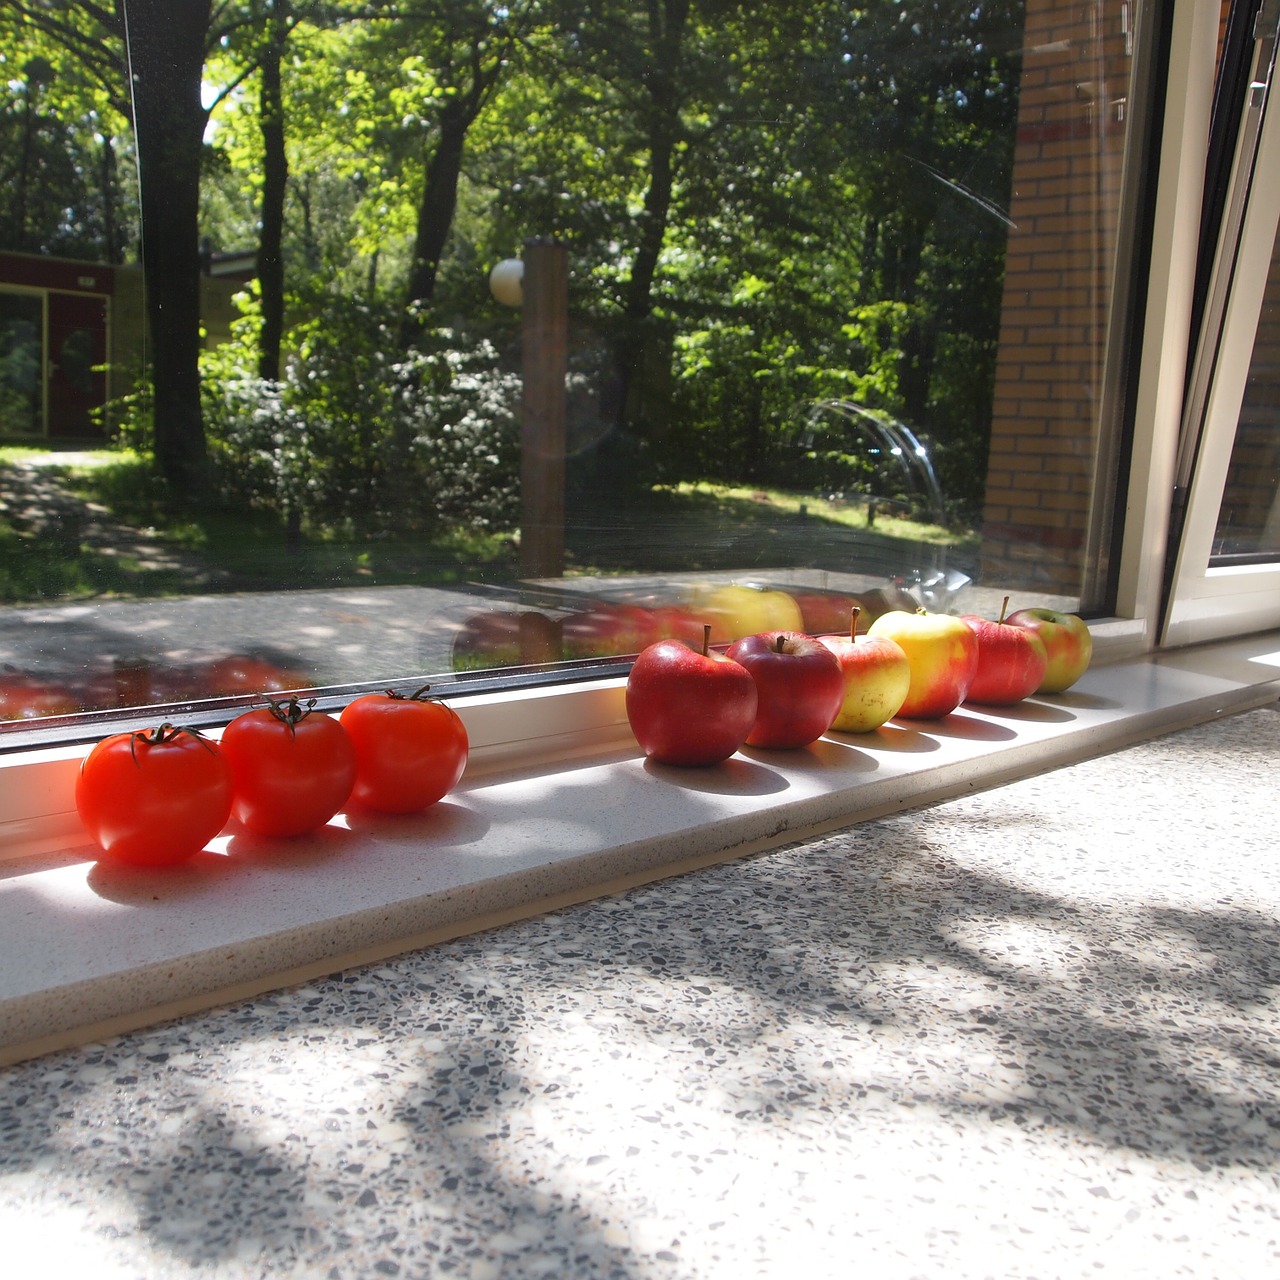 tomatoes apples window sill free photo